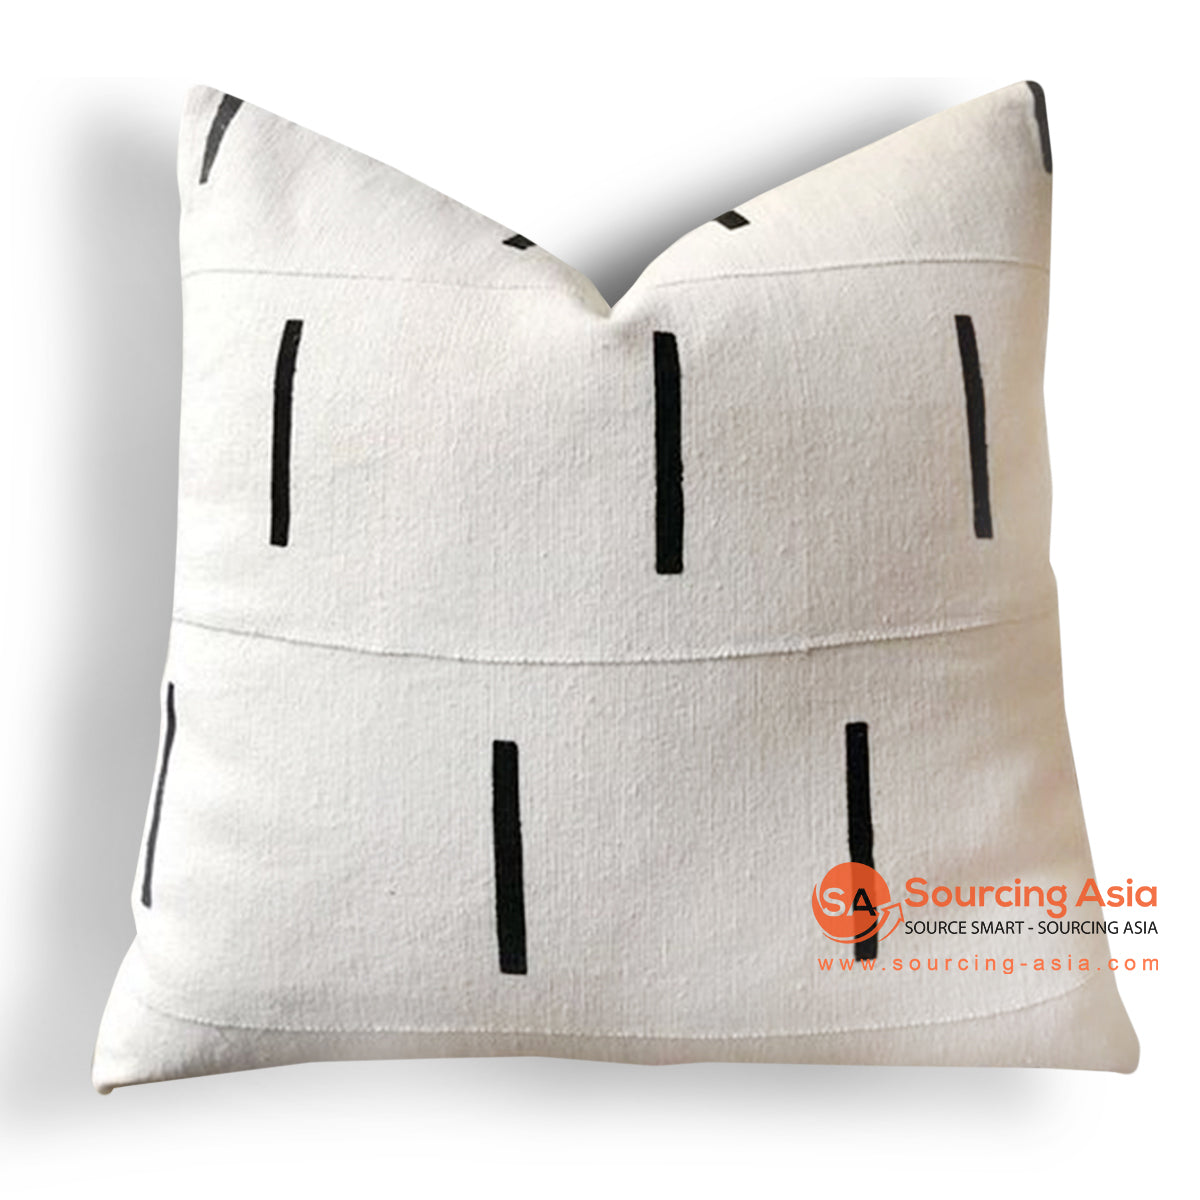 HIP016 WHITE FABRIC SCREEN PRINTED SQUARE CUSHION WITH BLACK LINES (PRICE WITHOUT INNER)